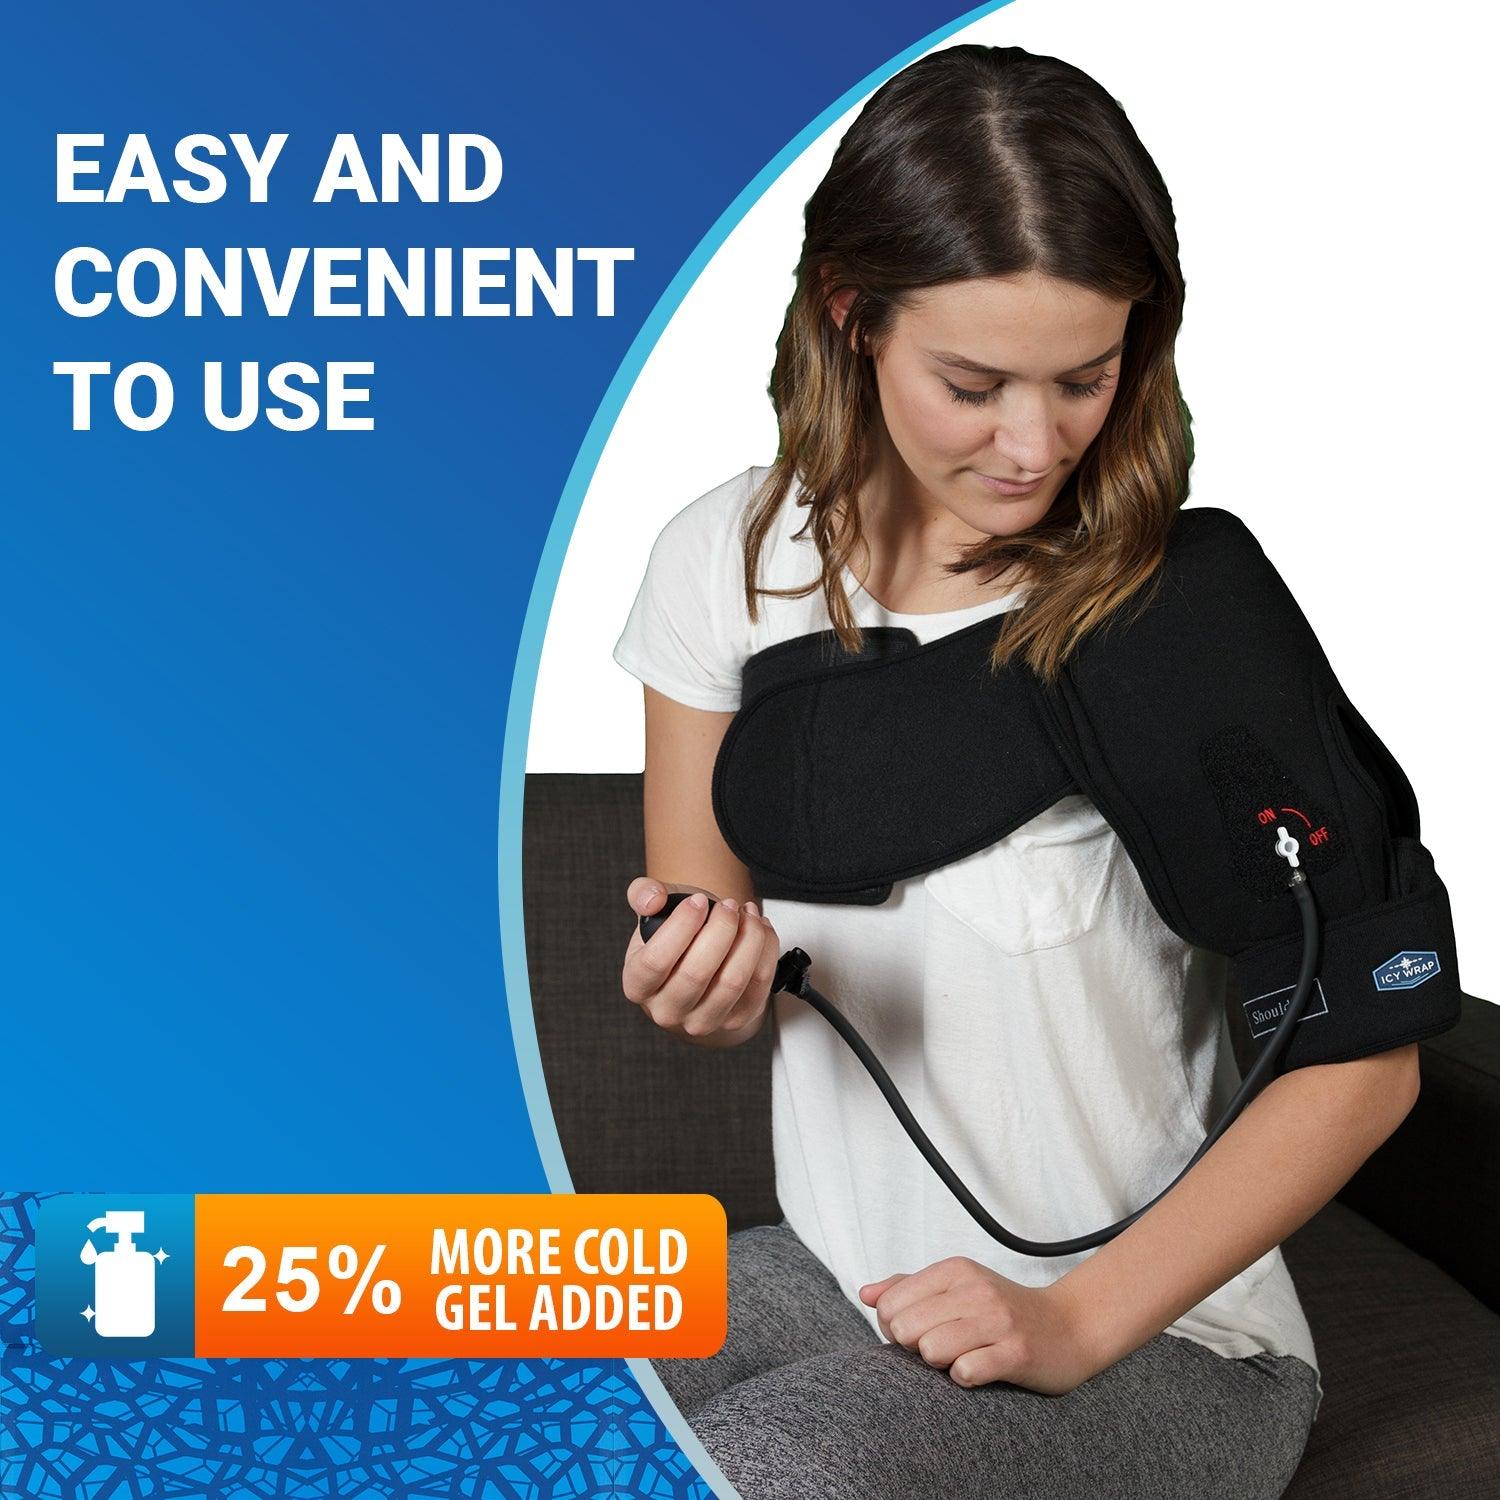 Icy Wrap Cold Compression Orthopedic Support Wrap - IW-Knee Icy Wrap Cold Compression Orthopedic Support Wrap - undefined by Supply Physical Therapy ice wraps